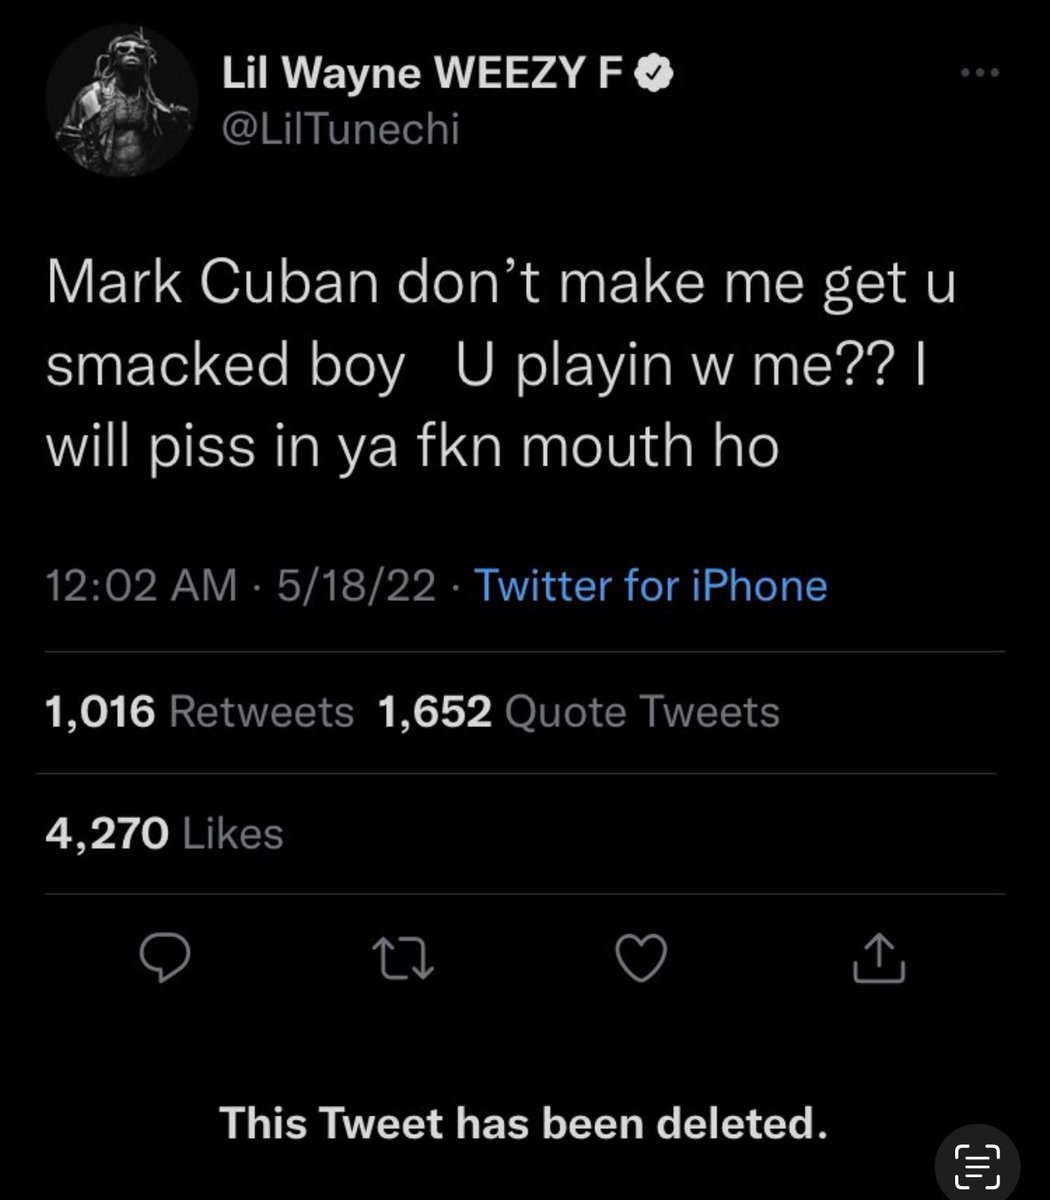 our favorite deleted tweets - screenshot - Lil Wayne Weezy F Mark Cuban don't make me get u smacked boy U playin w me?? | will piss in ya fkn mouth ho 51822 Twitter for iPhone 1,016 1,652 Quote Tweets 4,270 27 This Tweet has been deleted.